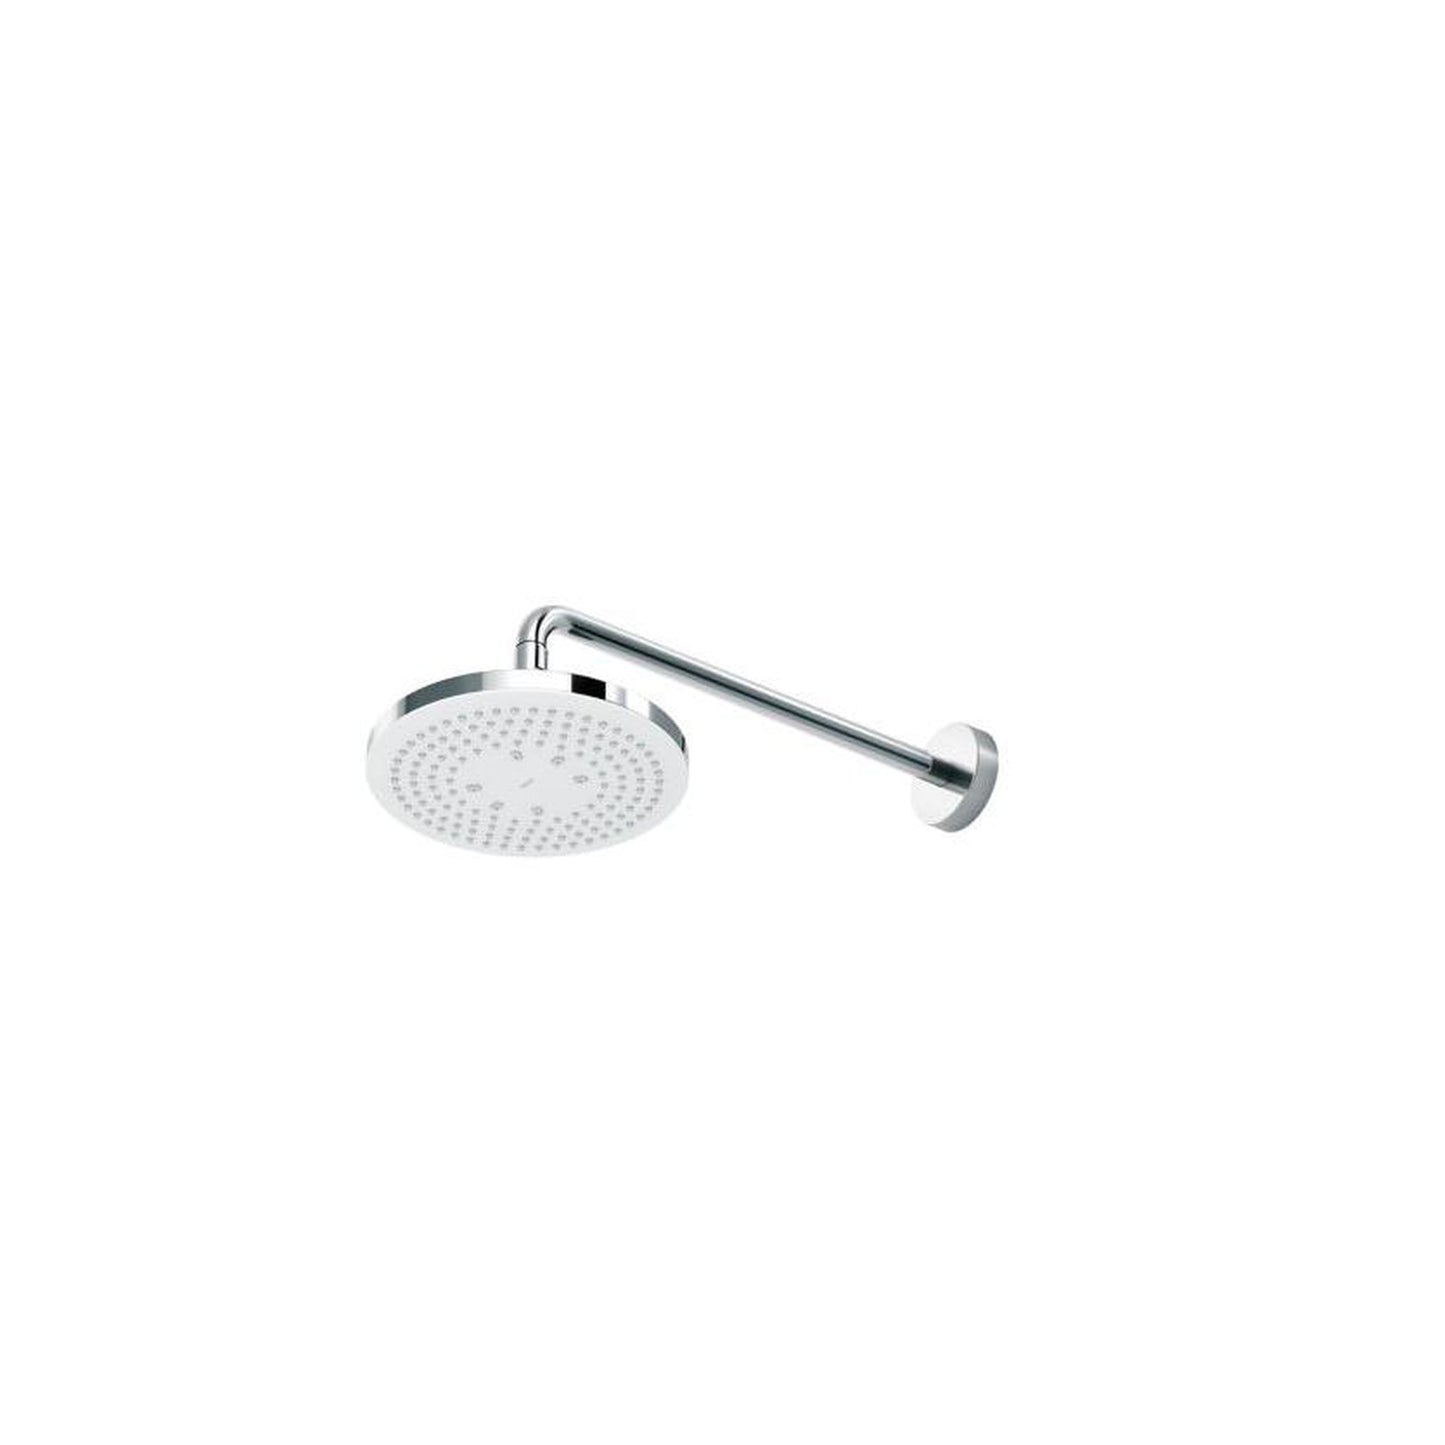 Toto SH,8.5”,1 Mode,2.5GPM,G,Round Polished Nickel